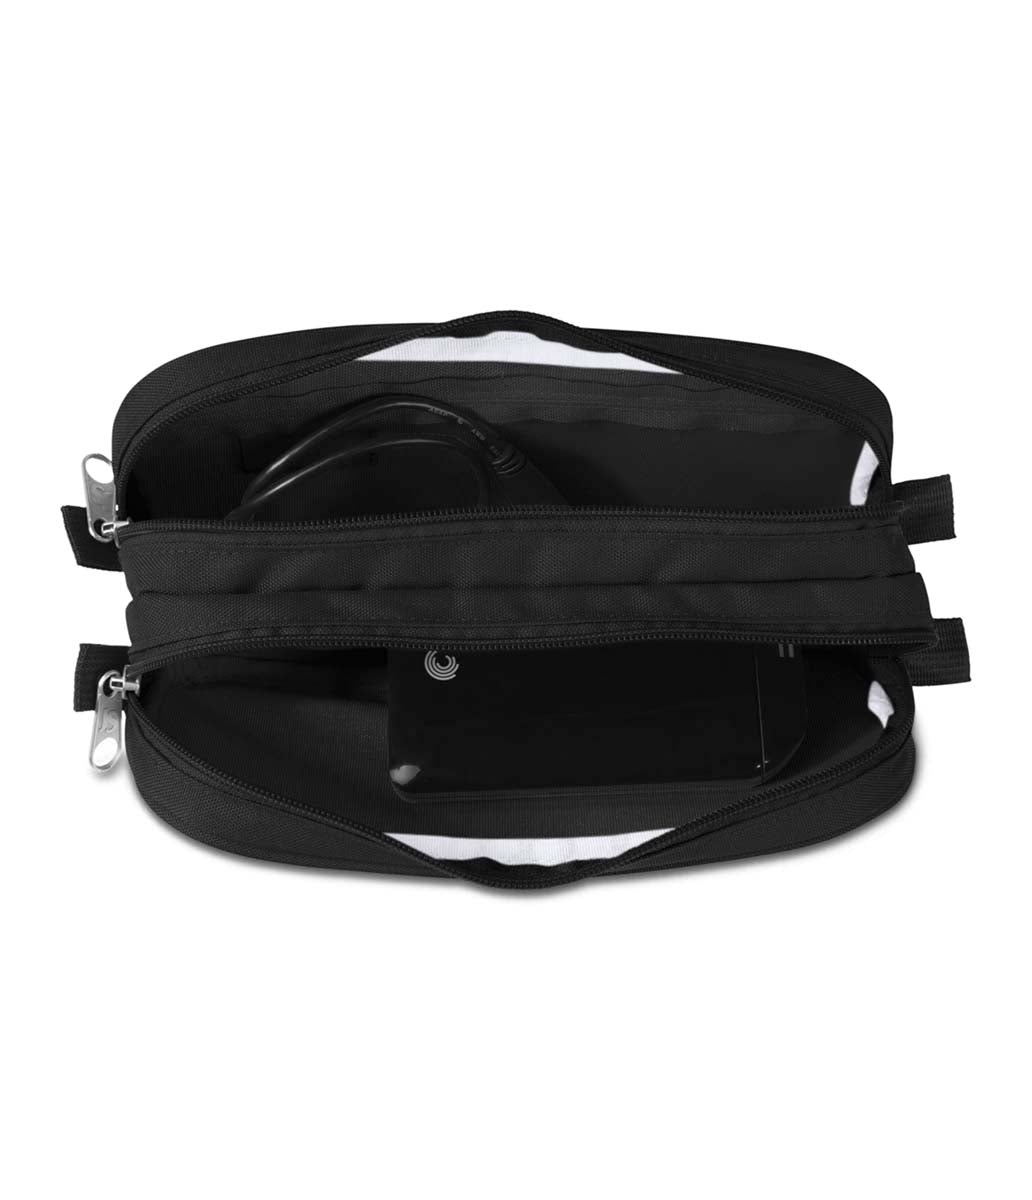 LARGE ACCESSORY POUCH Black